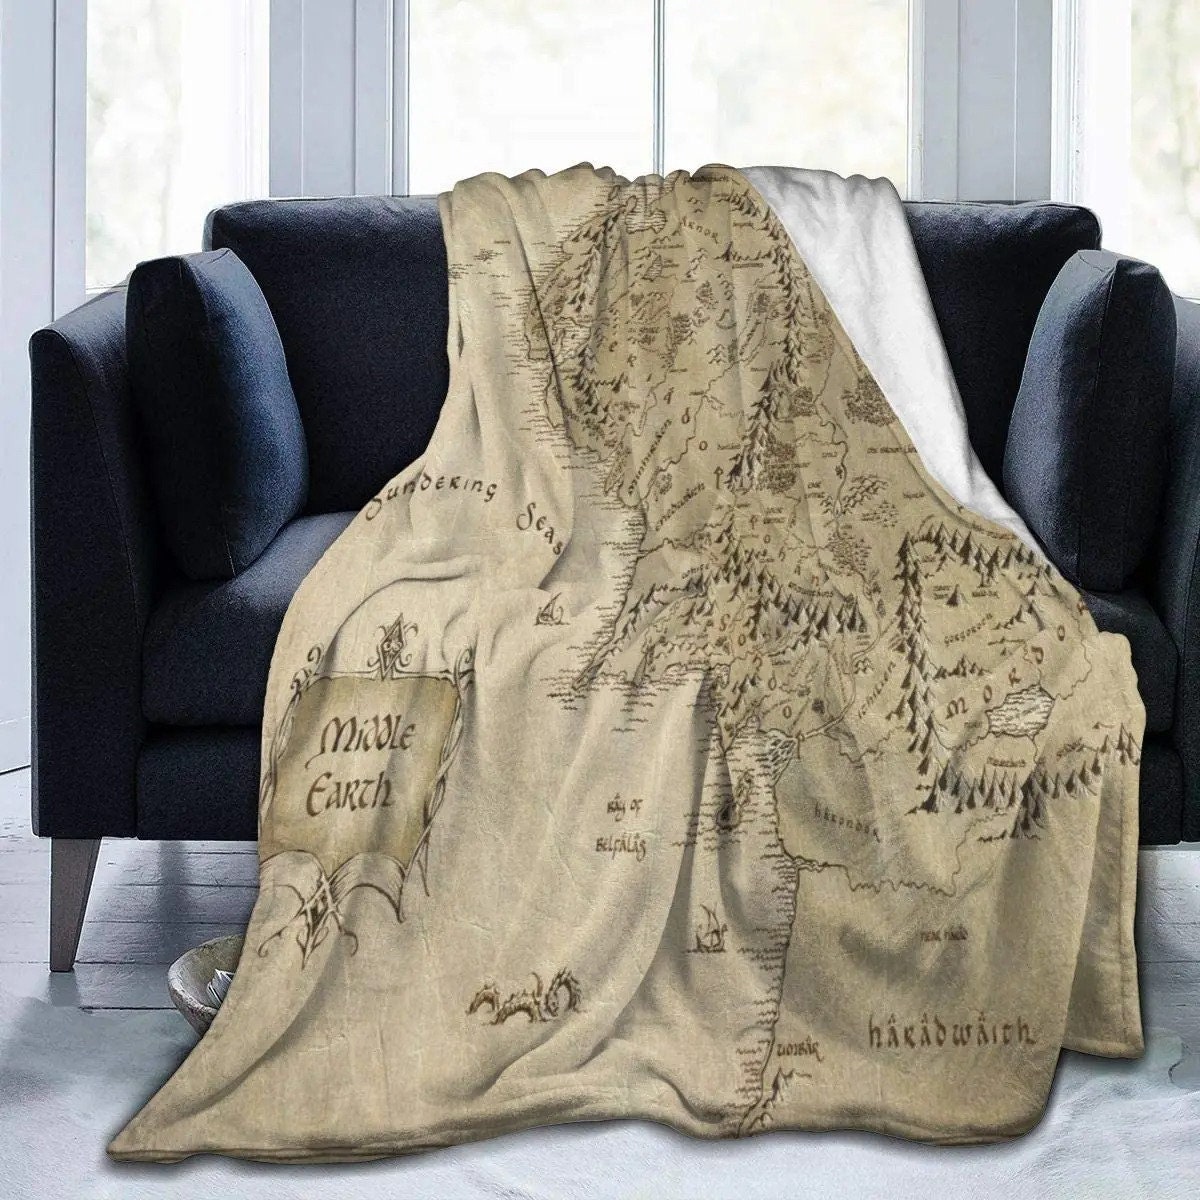 The Lord of the Rings Blanket, Middle-earth Sofa Cover, Napping